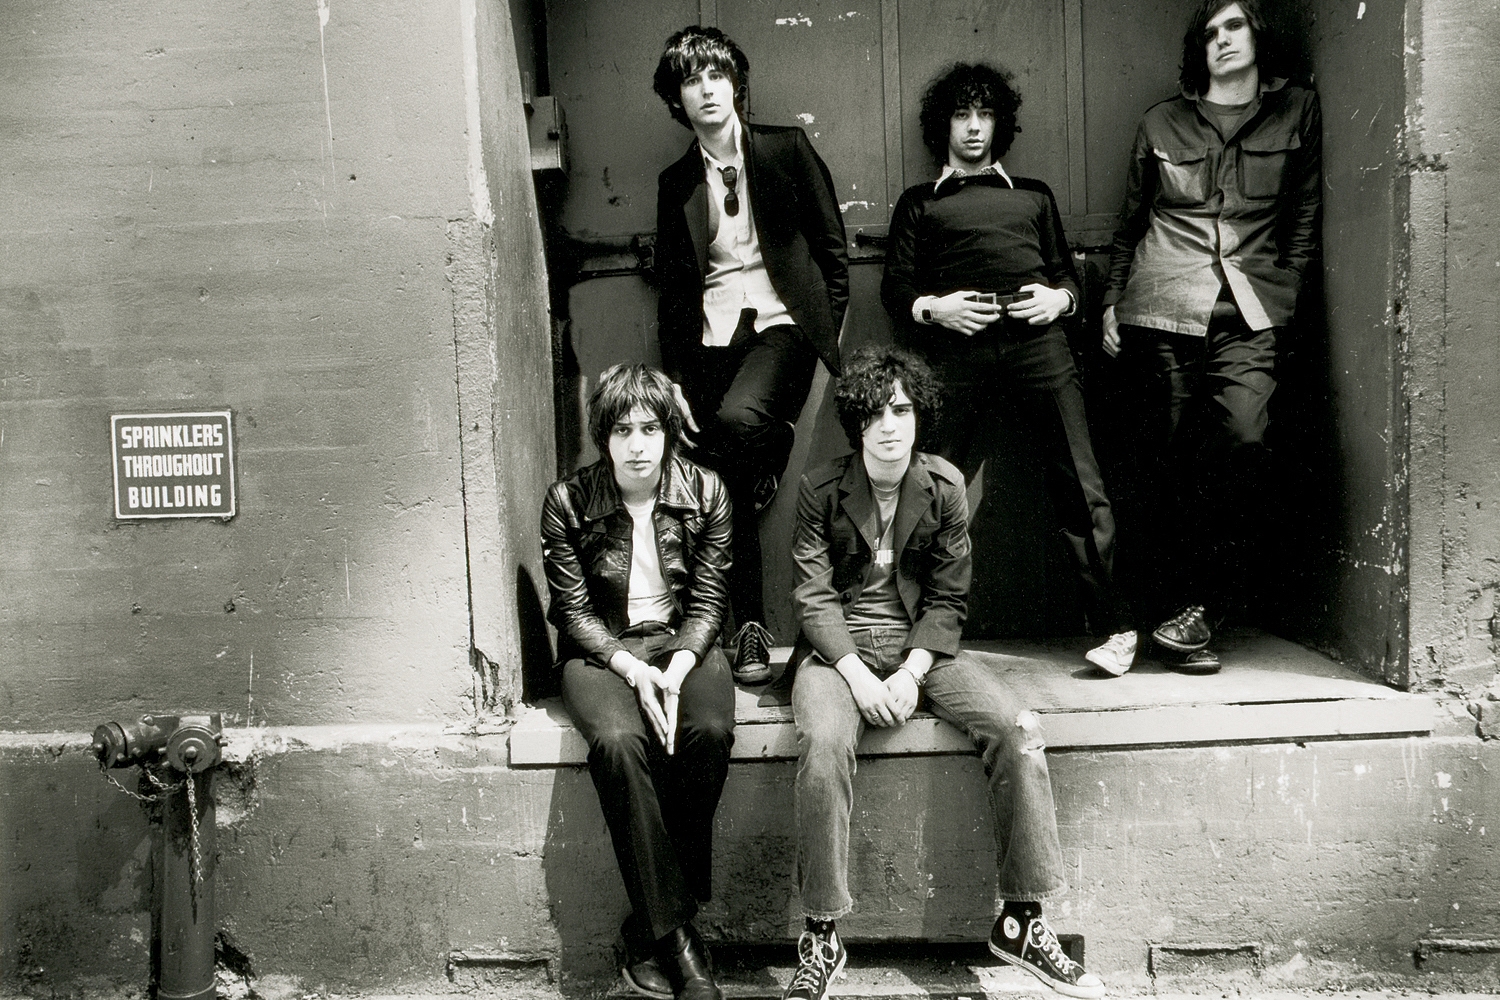 Hall of Fame: The Strokes, ‘Is This It’